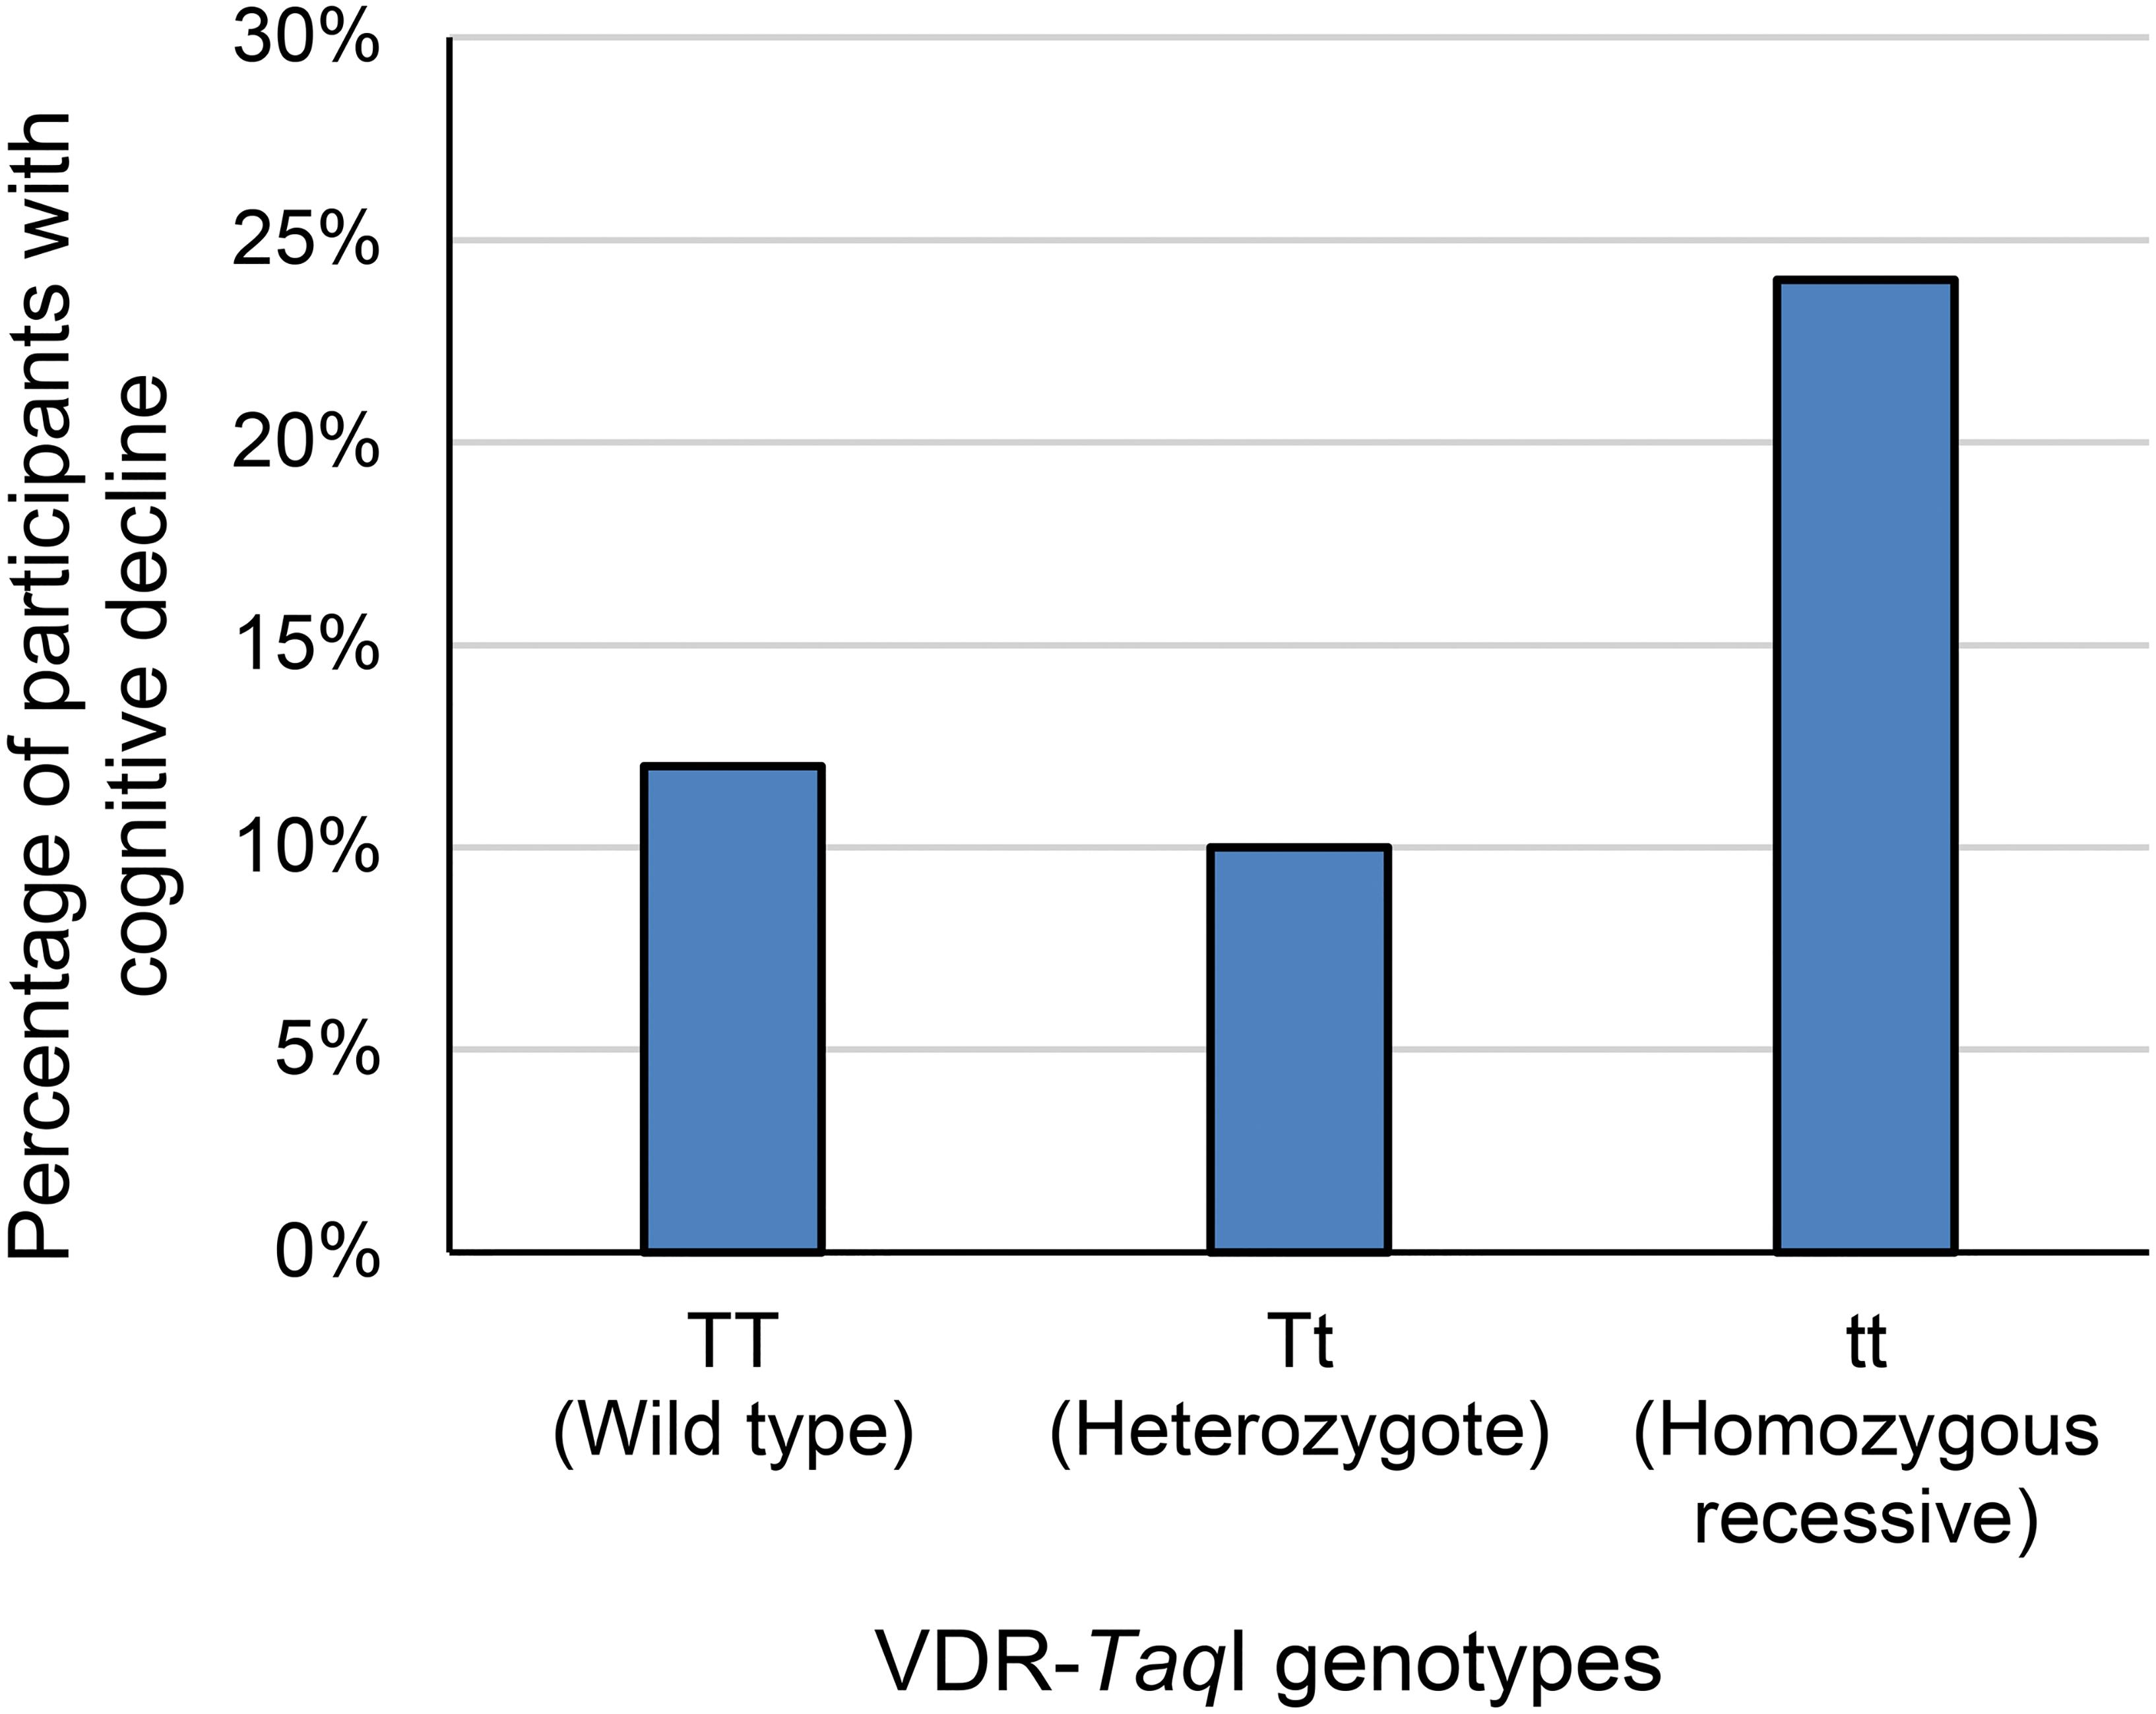 Percentage of participants with each VDR-<italic>Taq</italic>I gene variant (wild type TT, heterozygote Tt, homozygous recessive tt) and cognitive decline, based on an MMSE score of ≤ 25.